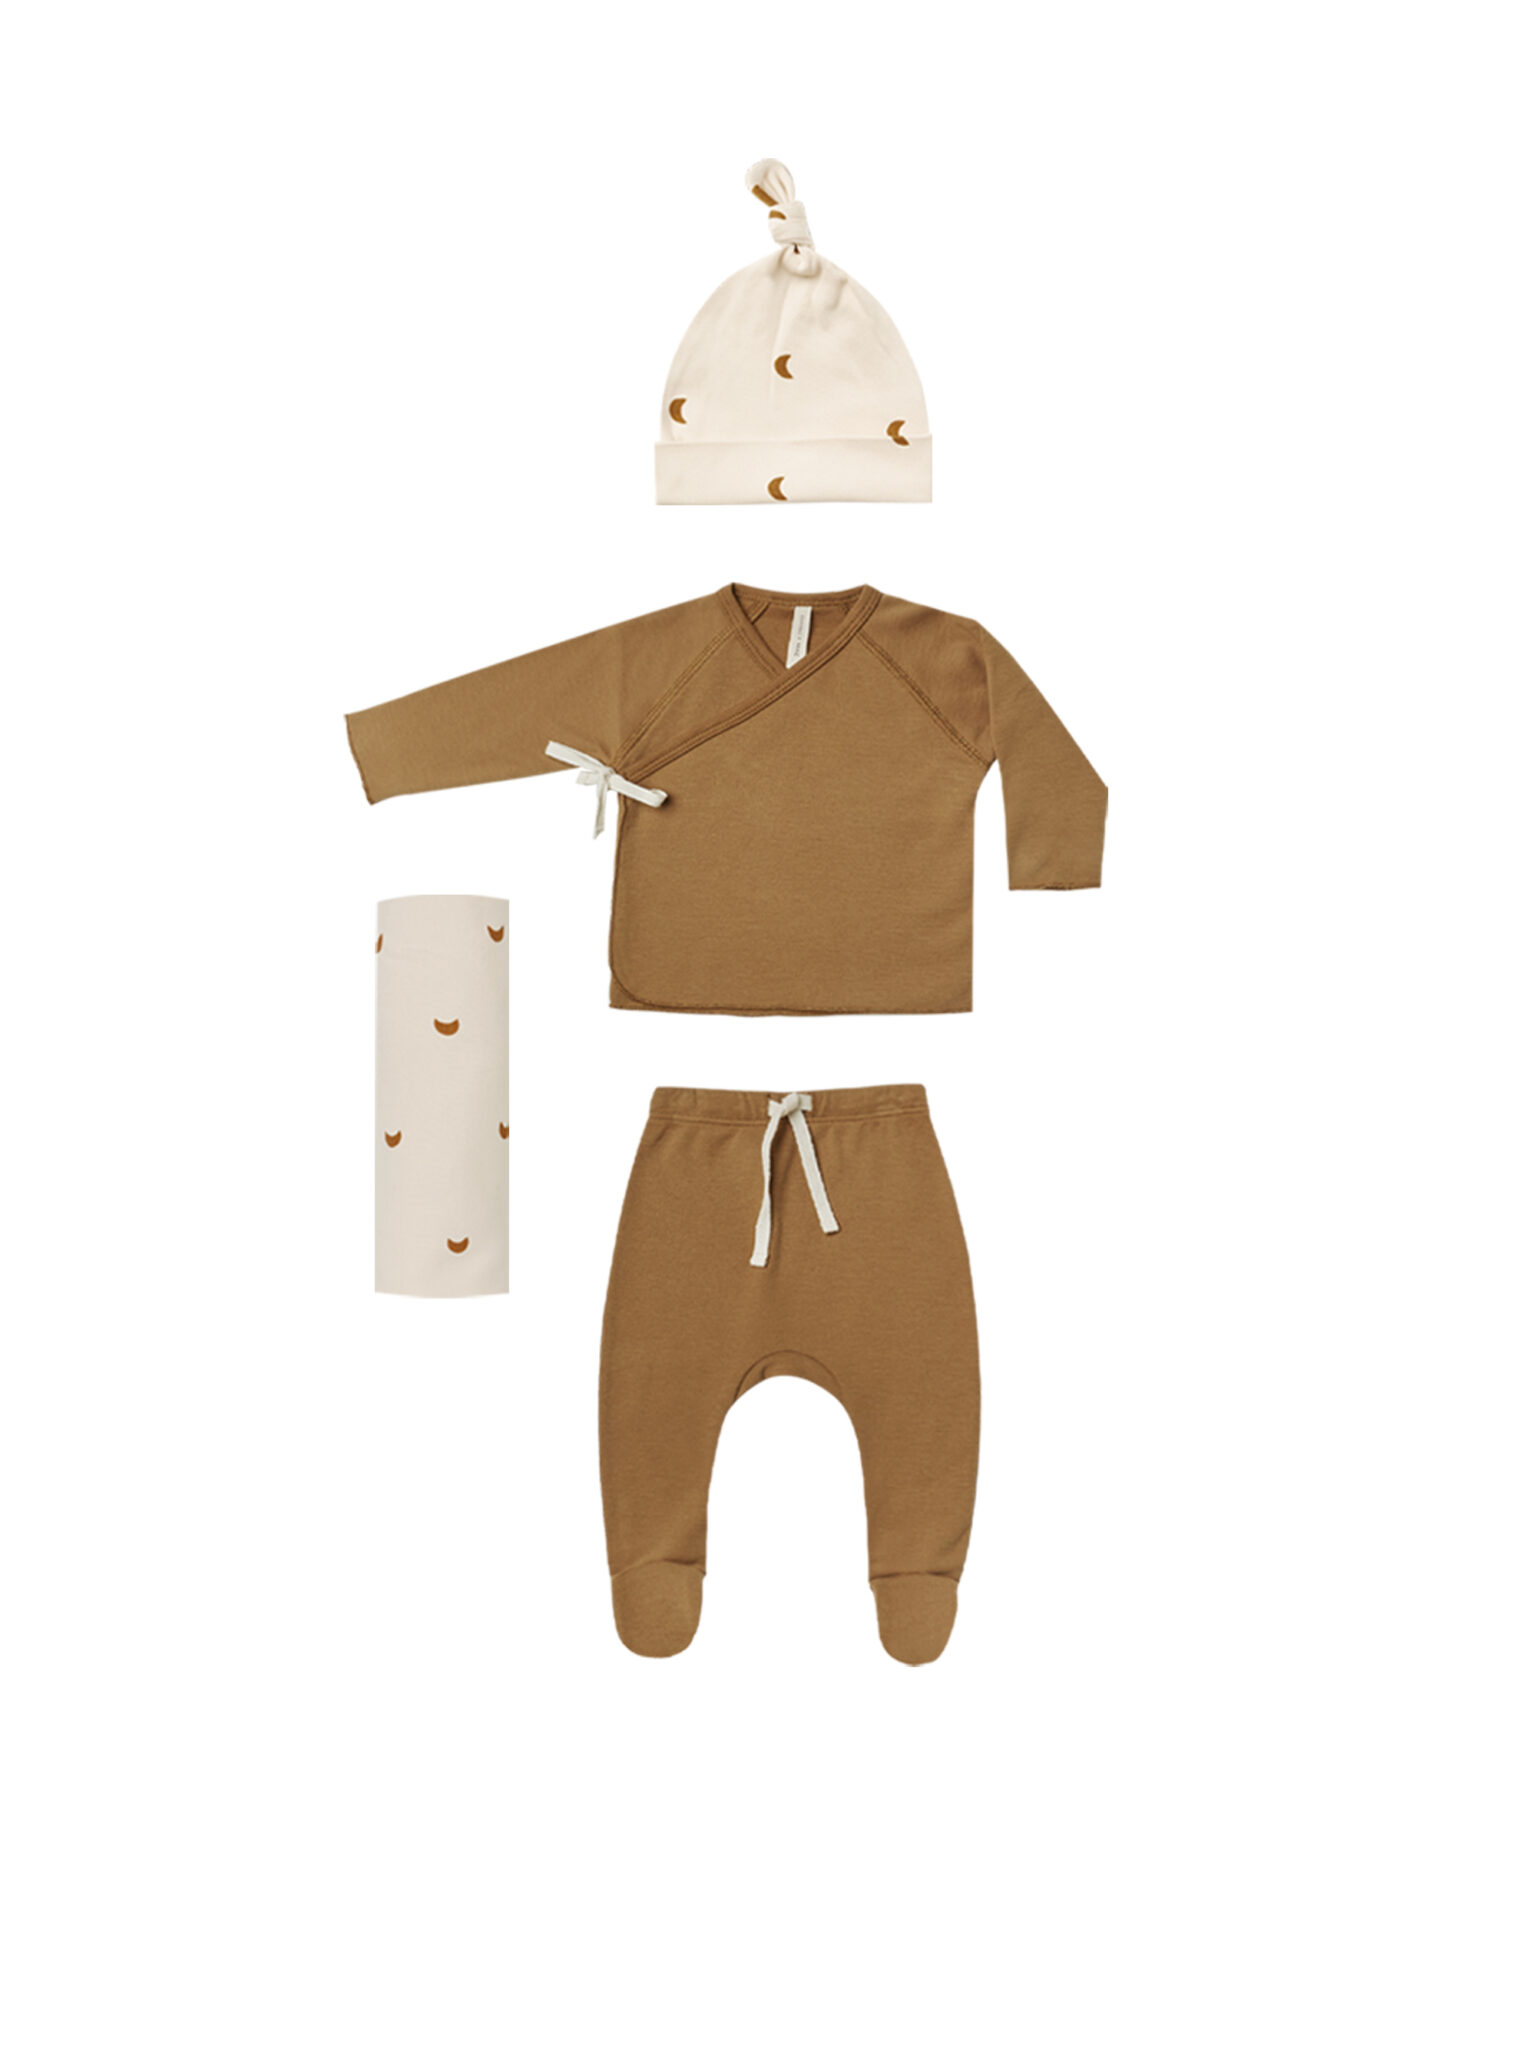 Quincy Mae | Baby set - Walnut | Charlie Ray Shop for babies and kids